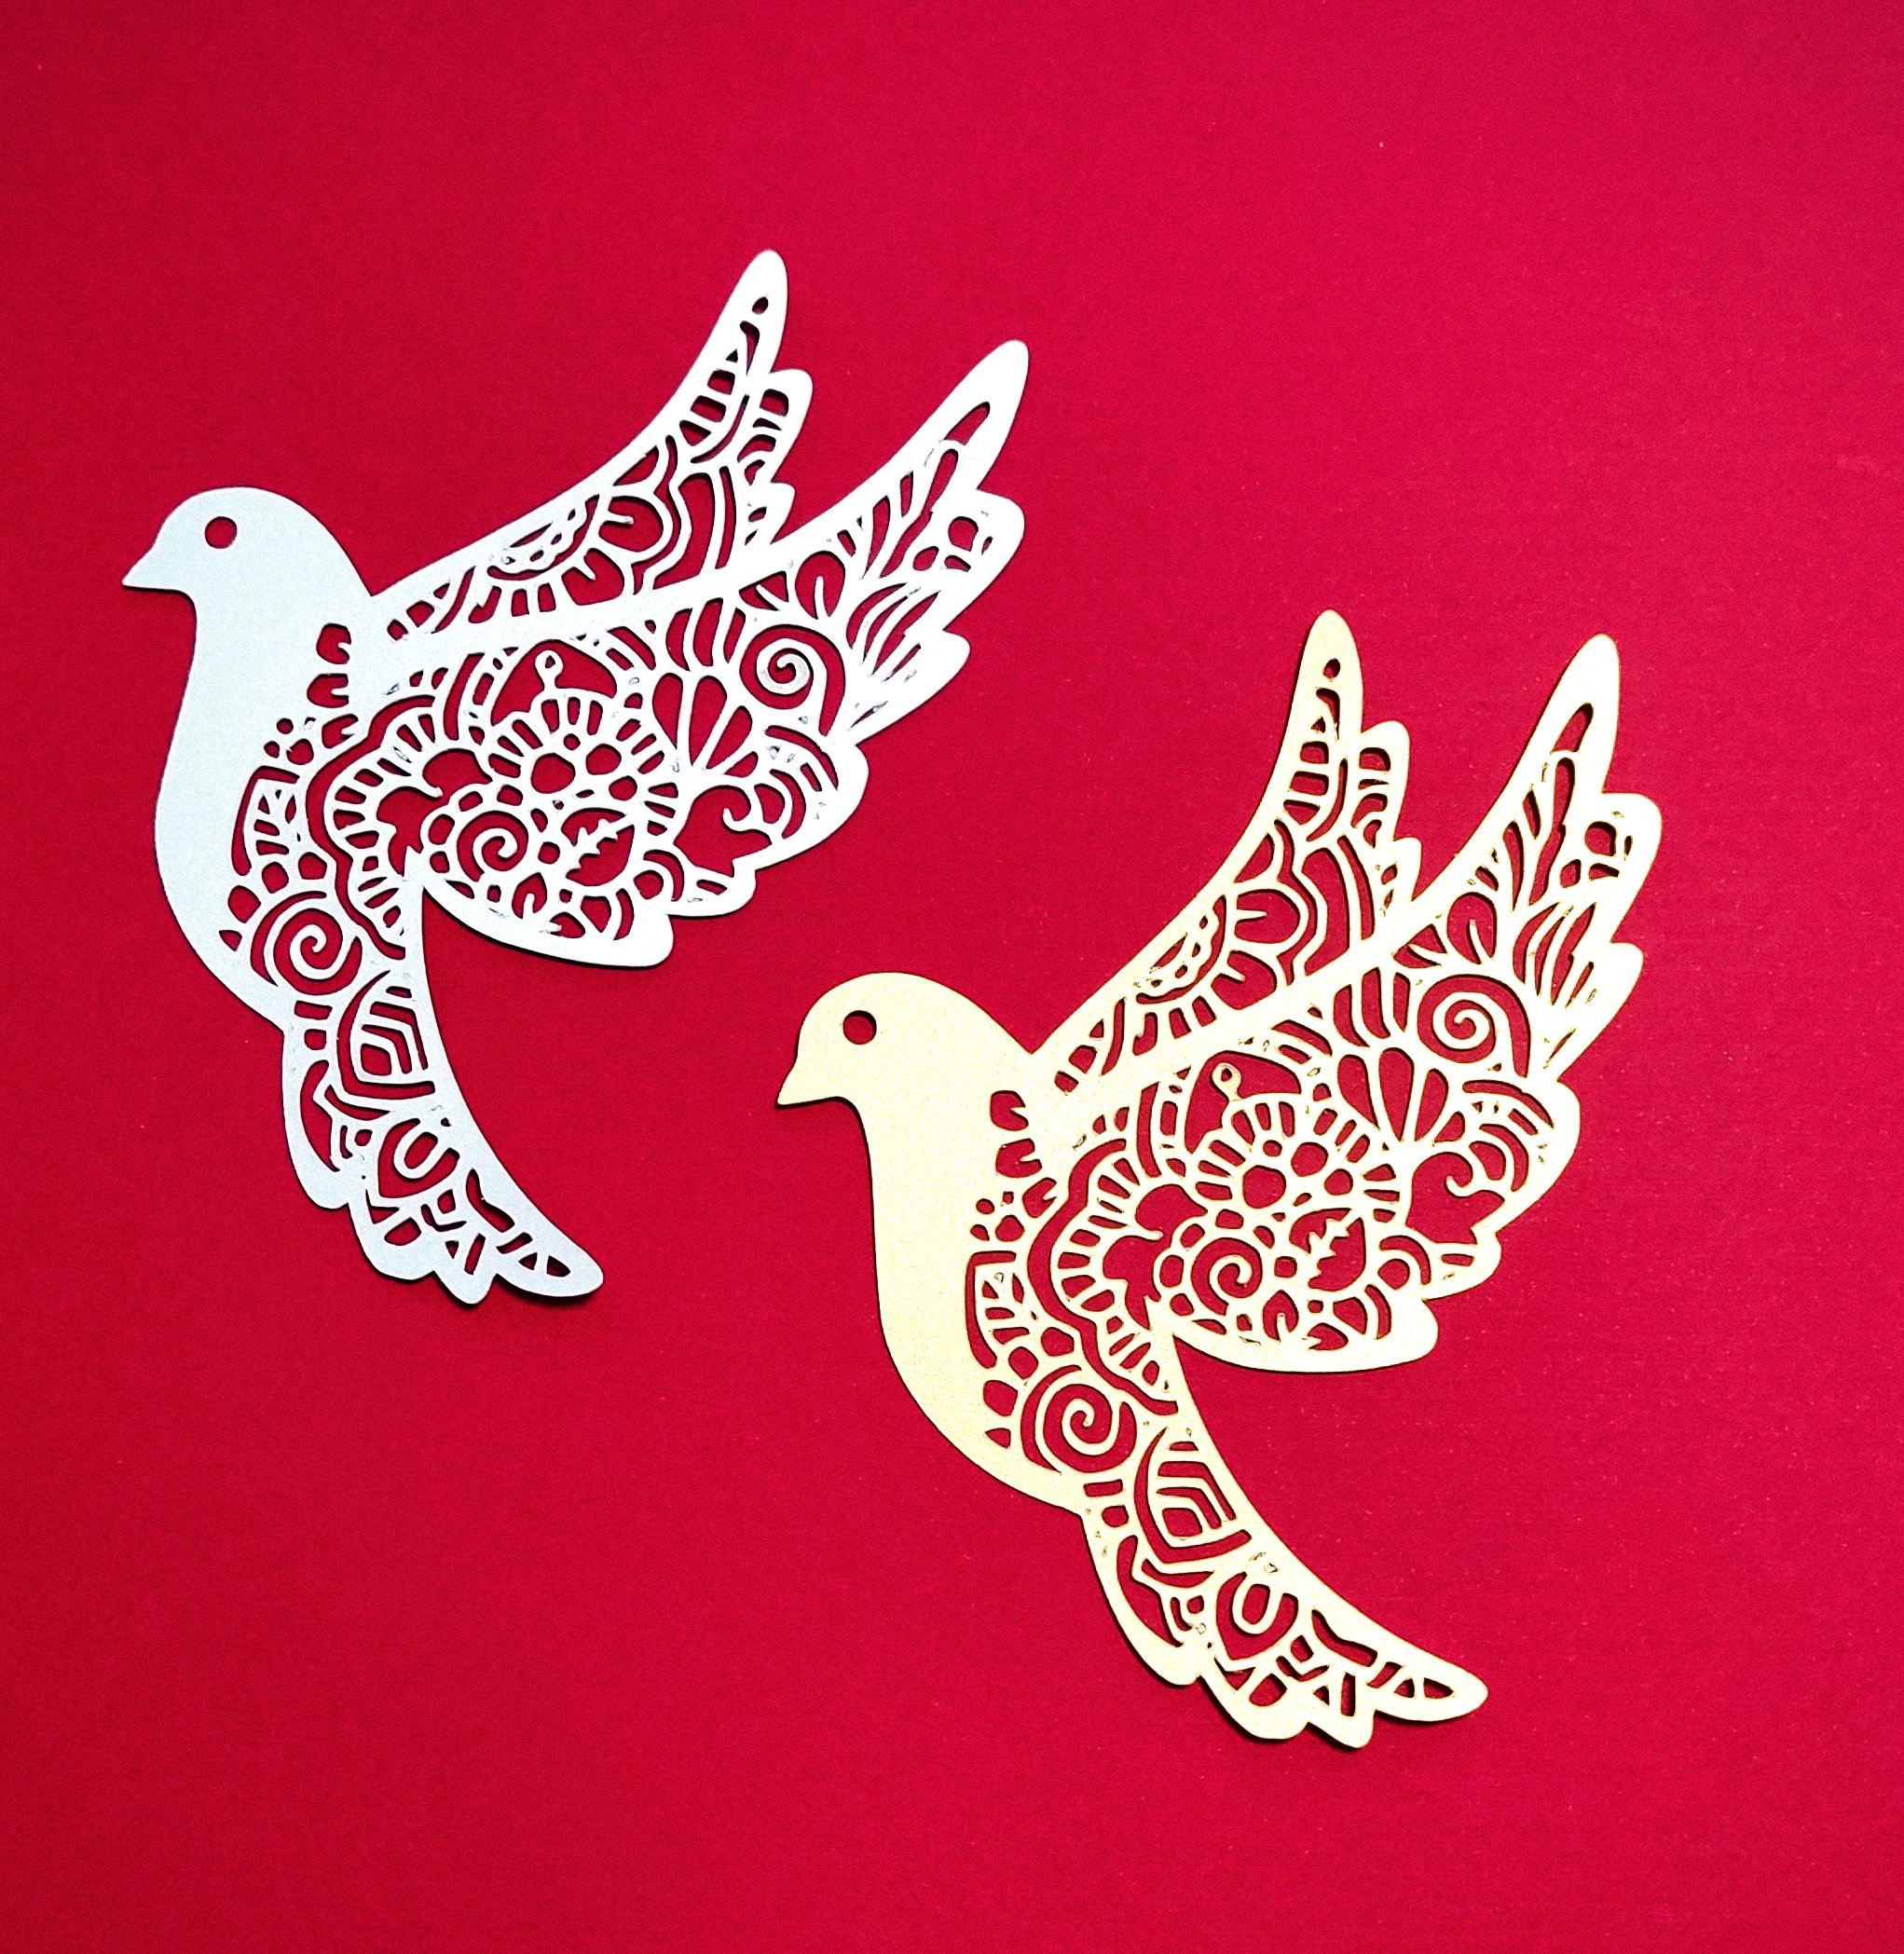 12 PC. DOVE DIE CUTS FOR CARD MAKING & SCRAPBOOKING~ CHRISTMAS~ PEACE~LOVE